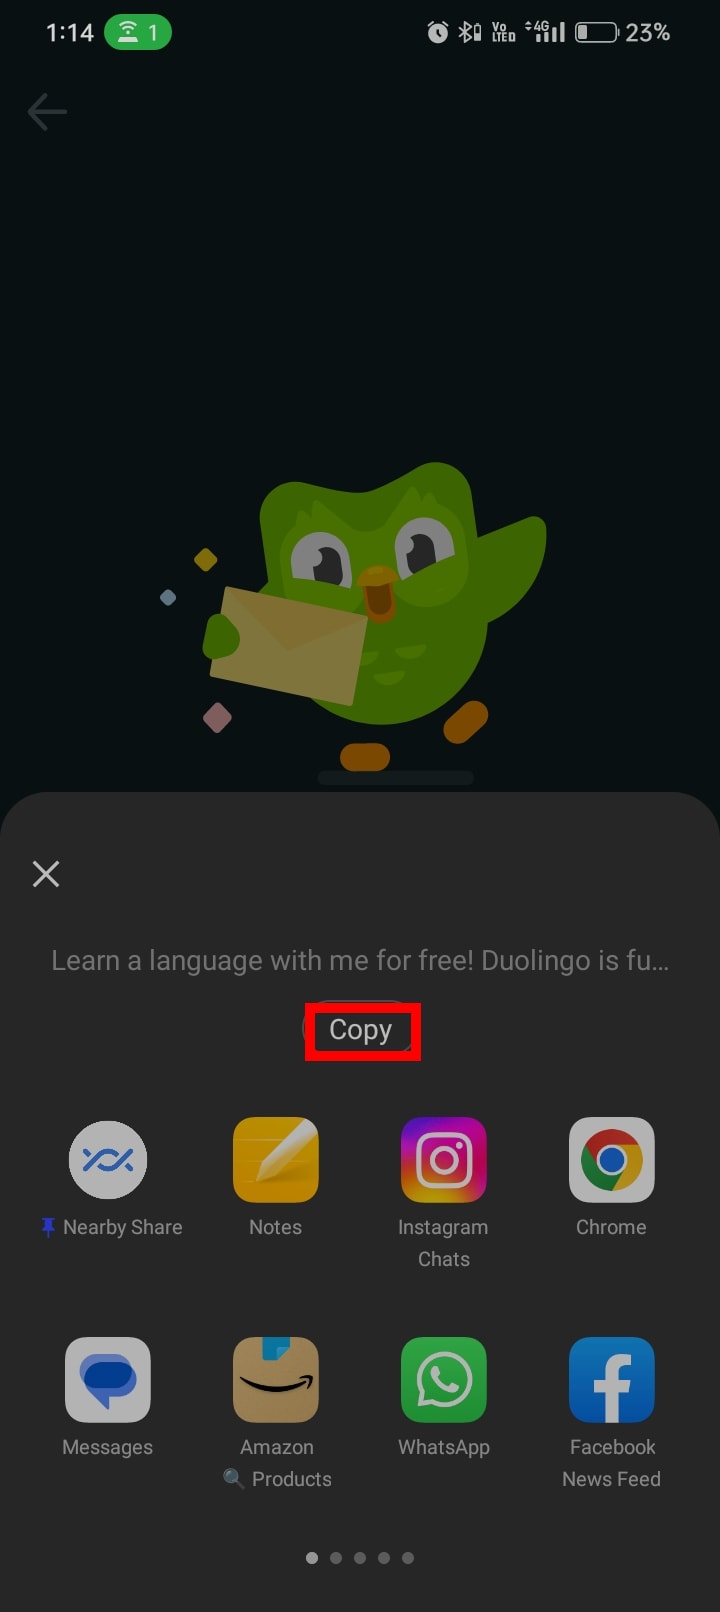 If you choose MORE OPTIONS, you'll encounter various options or social media apps to share your Duolingo account link. You can also tap Copy to copy the link from these options.